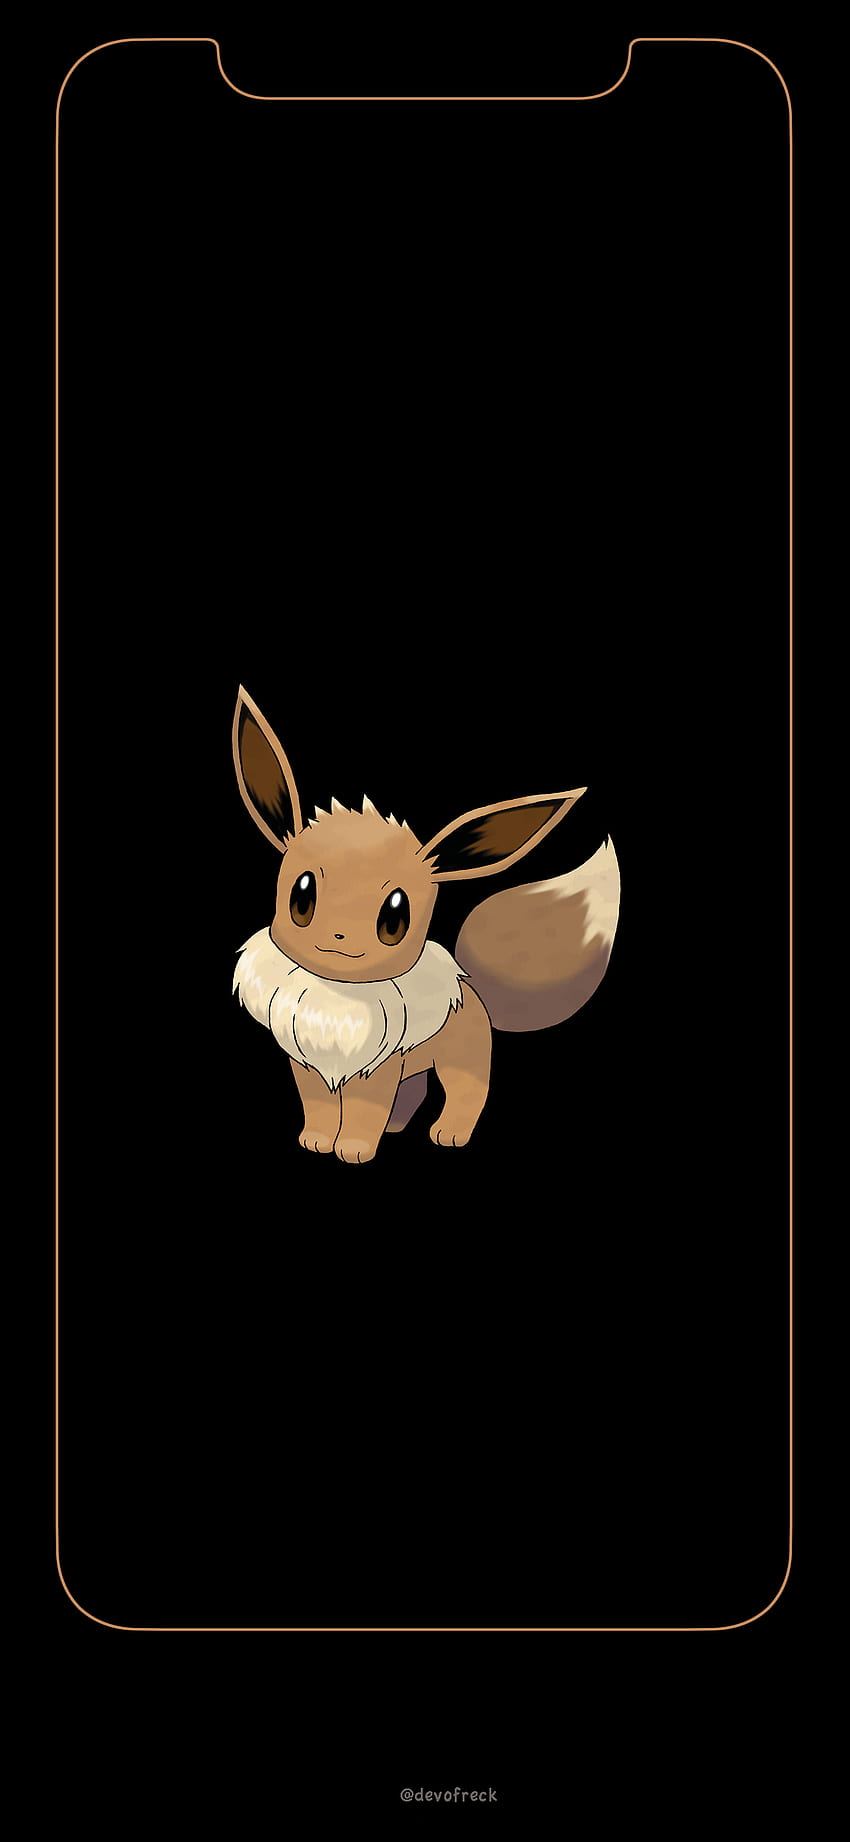 In anticipation for Pokemon Let's Go Pikachu and Let's Go Eevee I, Cool Pokemon HD phone wallpaper